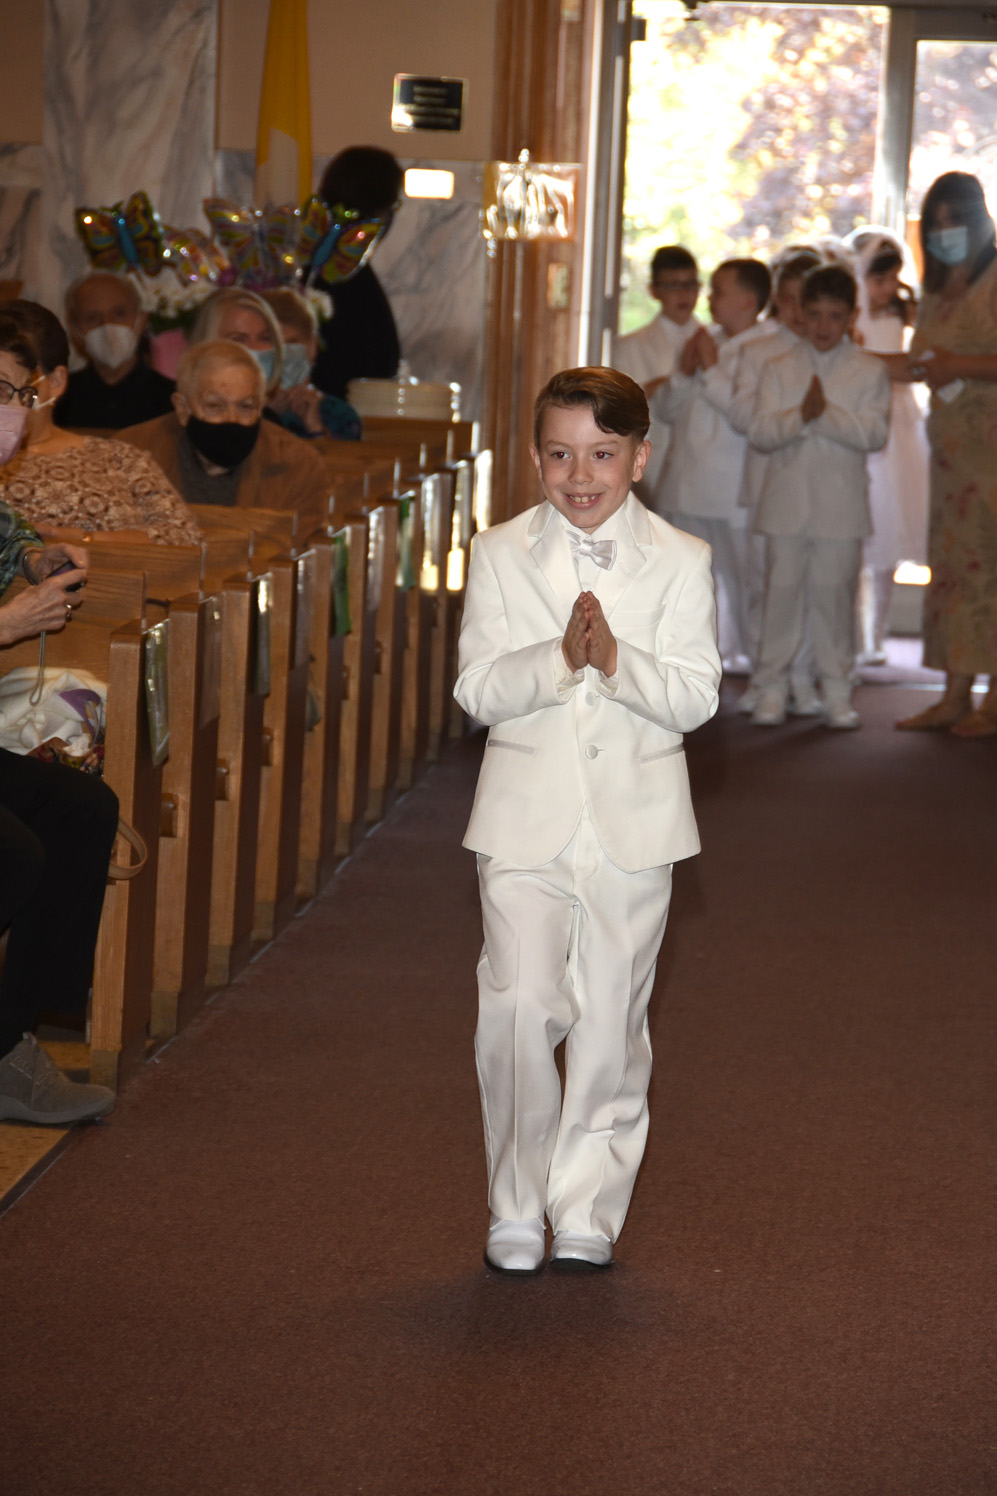 FIRST-COMMUNION-MAY-16-2021-34